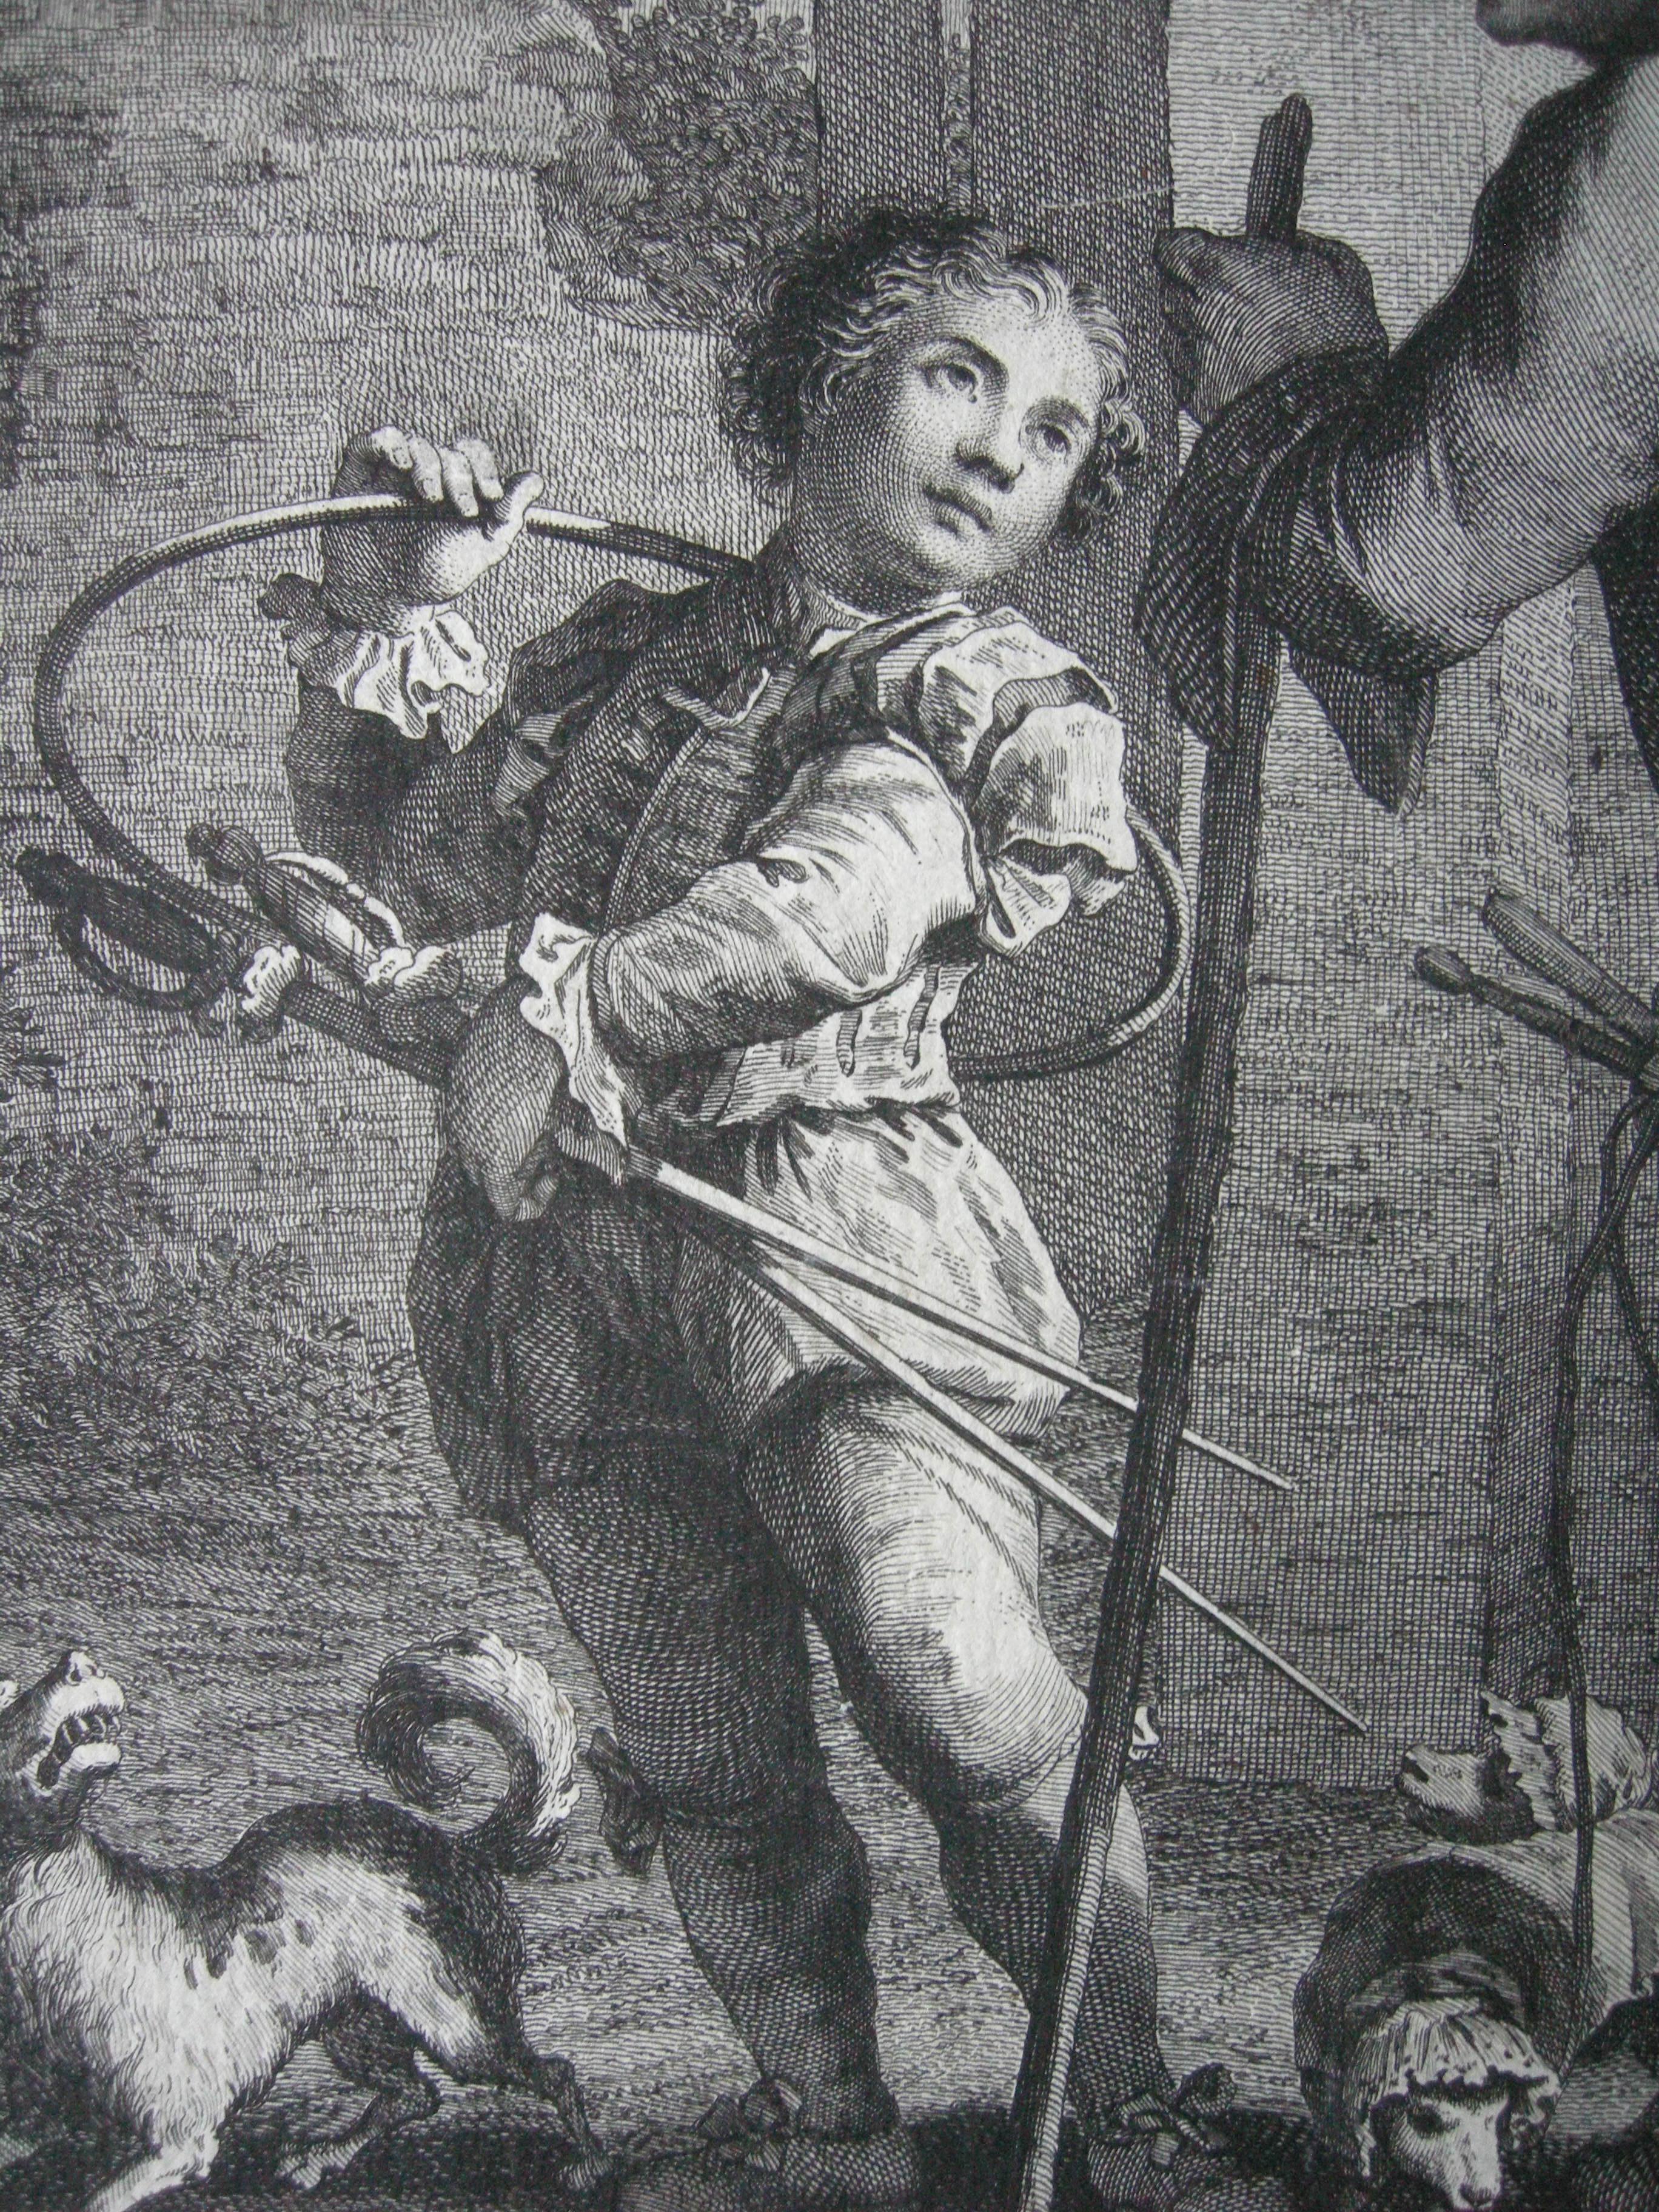 This delightful original copper engraving by Giovanni Volpato ( 1733-1803 ) after a painting by Francesco Maggiotto ( 1738-1805 ) was executed in Venice in 1765.
A little boy, carrying two daggers and a hoop, is look up to a man with a walking